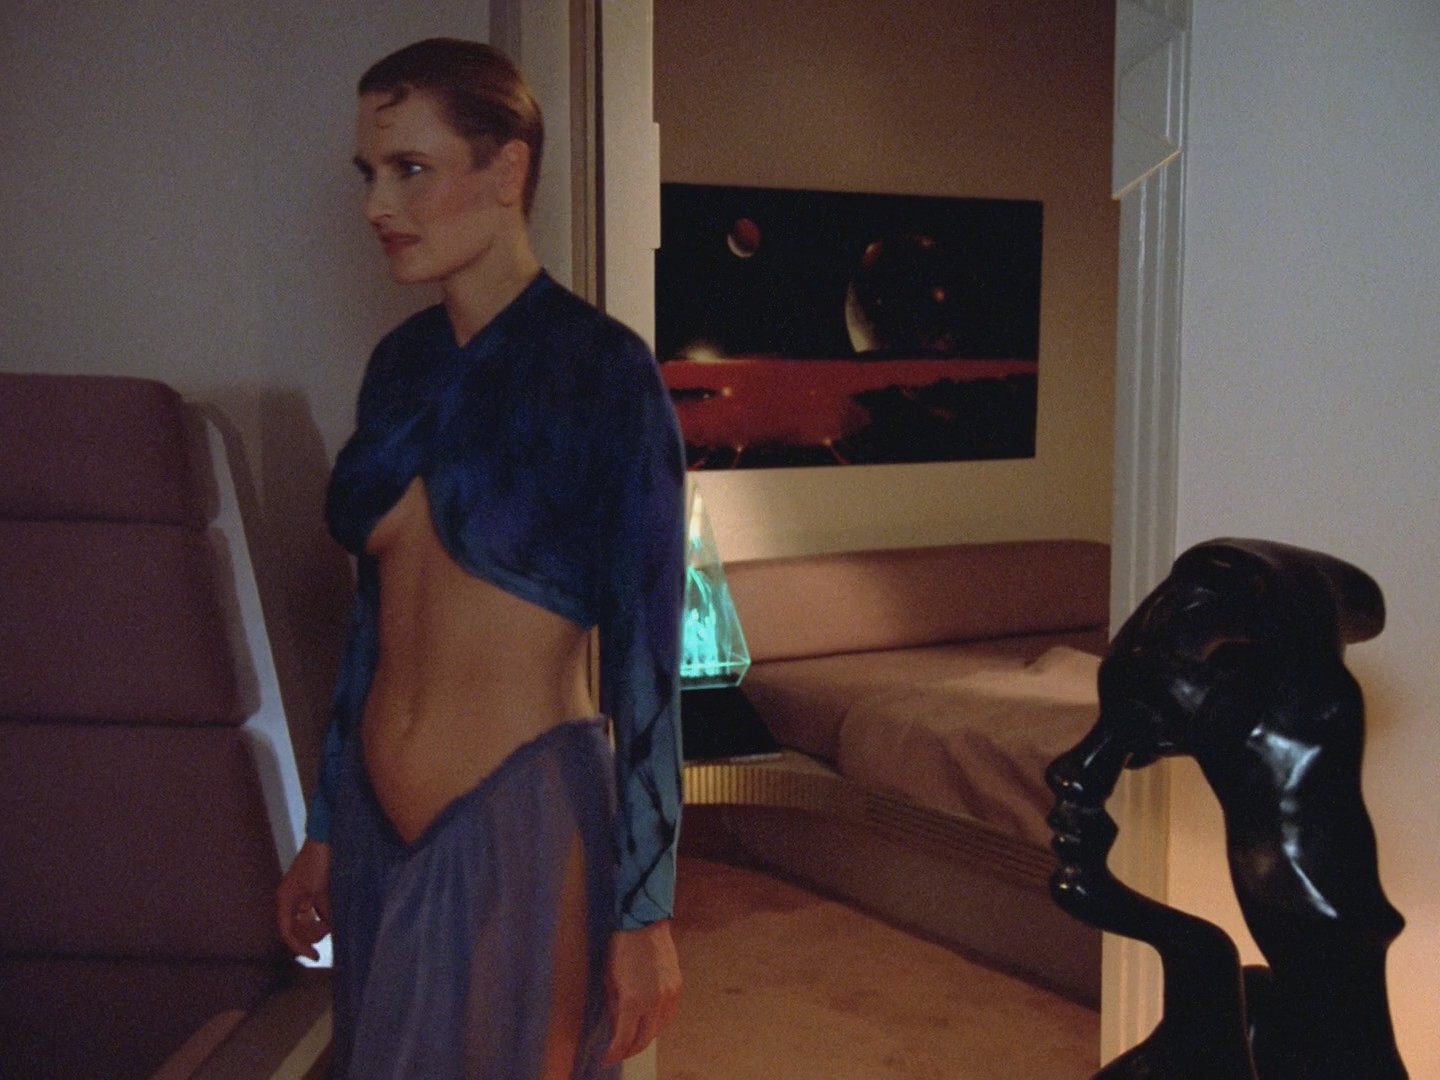 Sexy Denise Crosby Nude